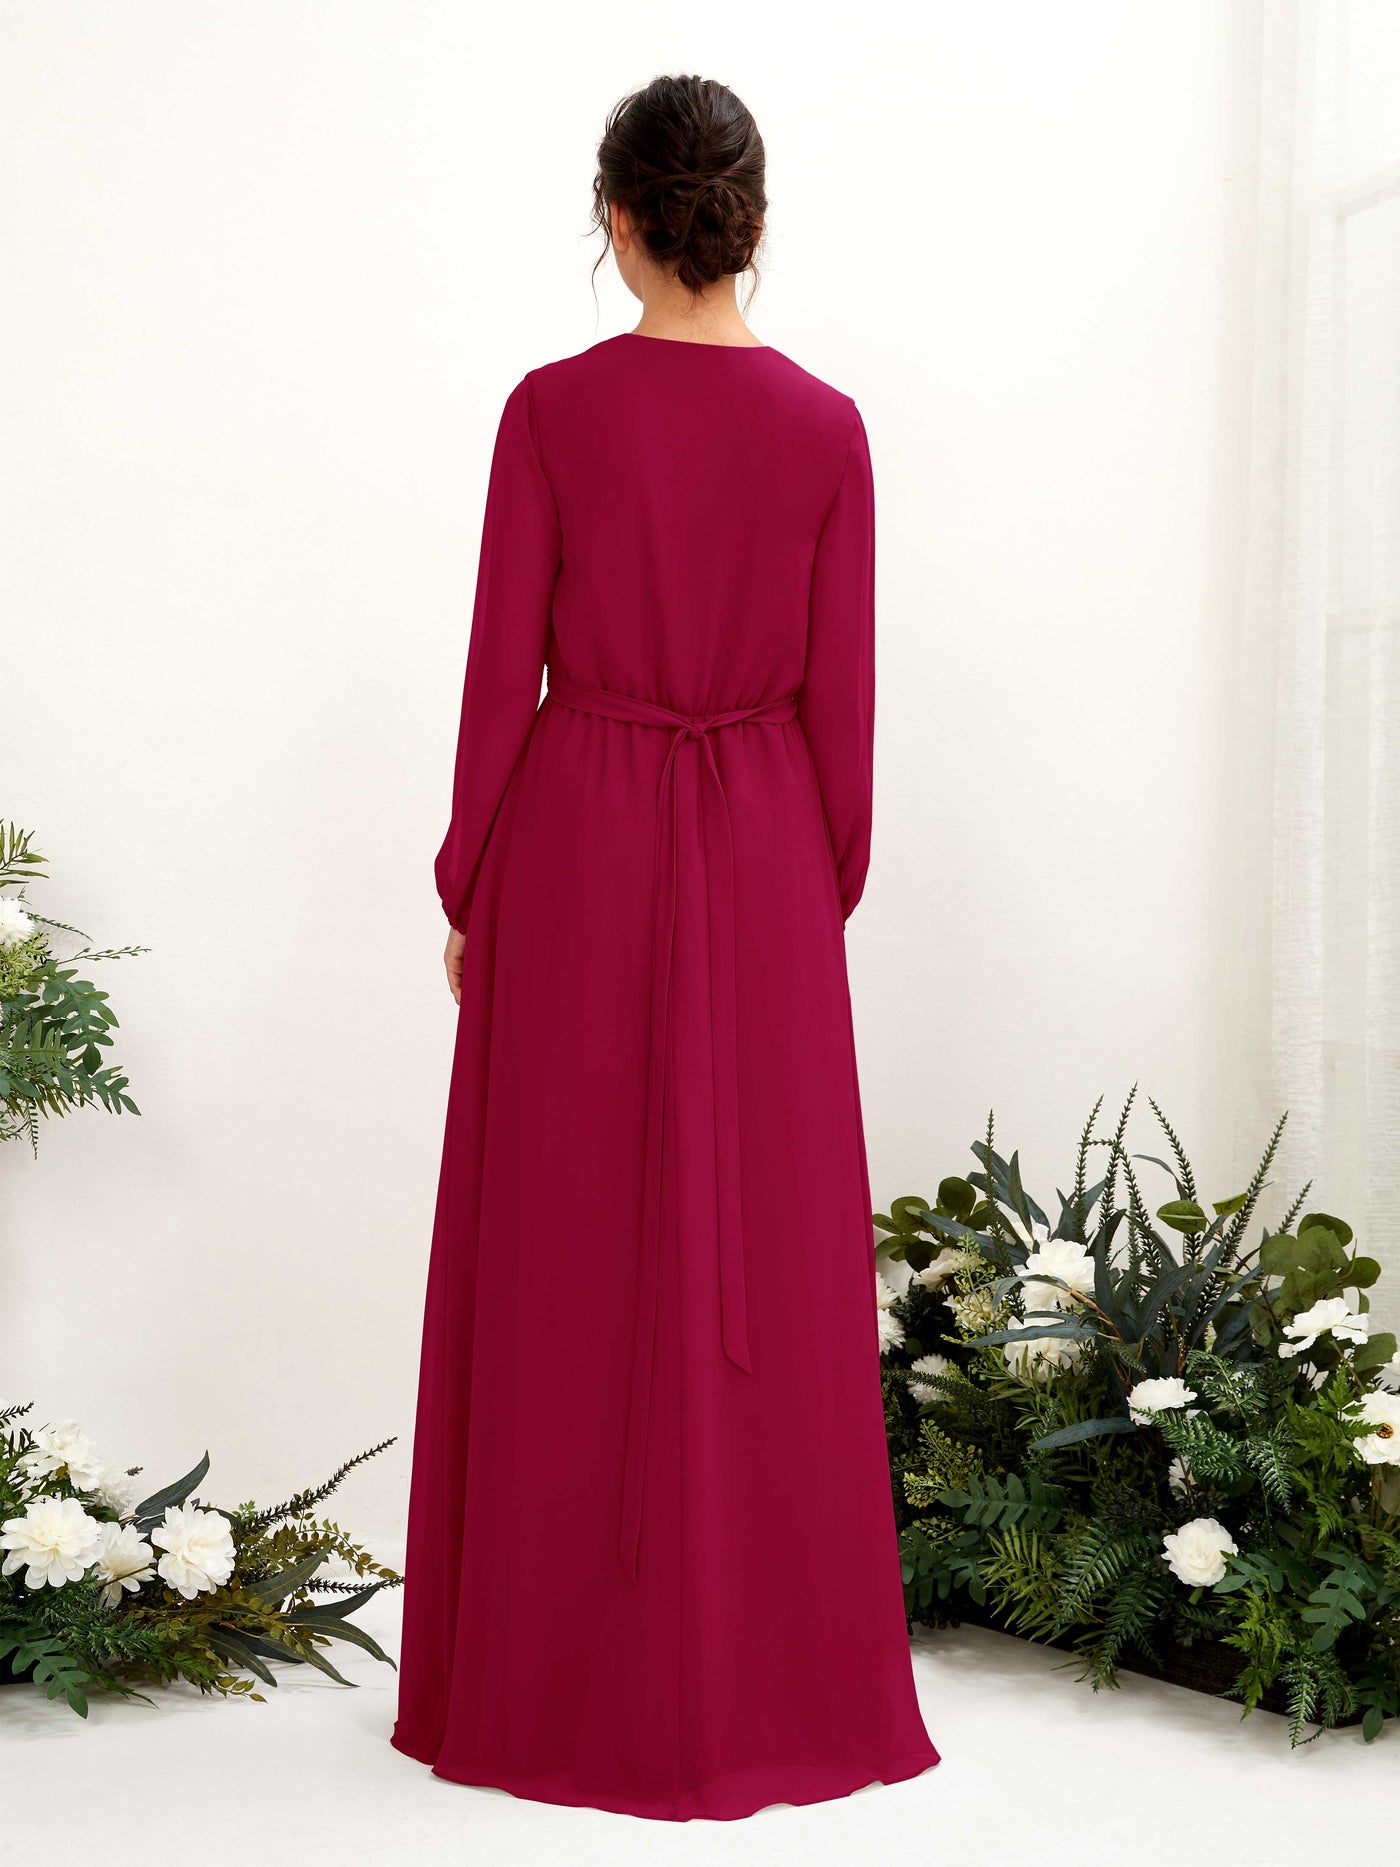 Jester Red Bridesmaid Dresses Bridesmaid Dress A-line Chiffon V-neck Full Length Long Sleeves Wedding Party Dress (81223241)#color_jester-red